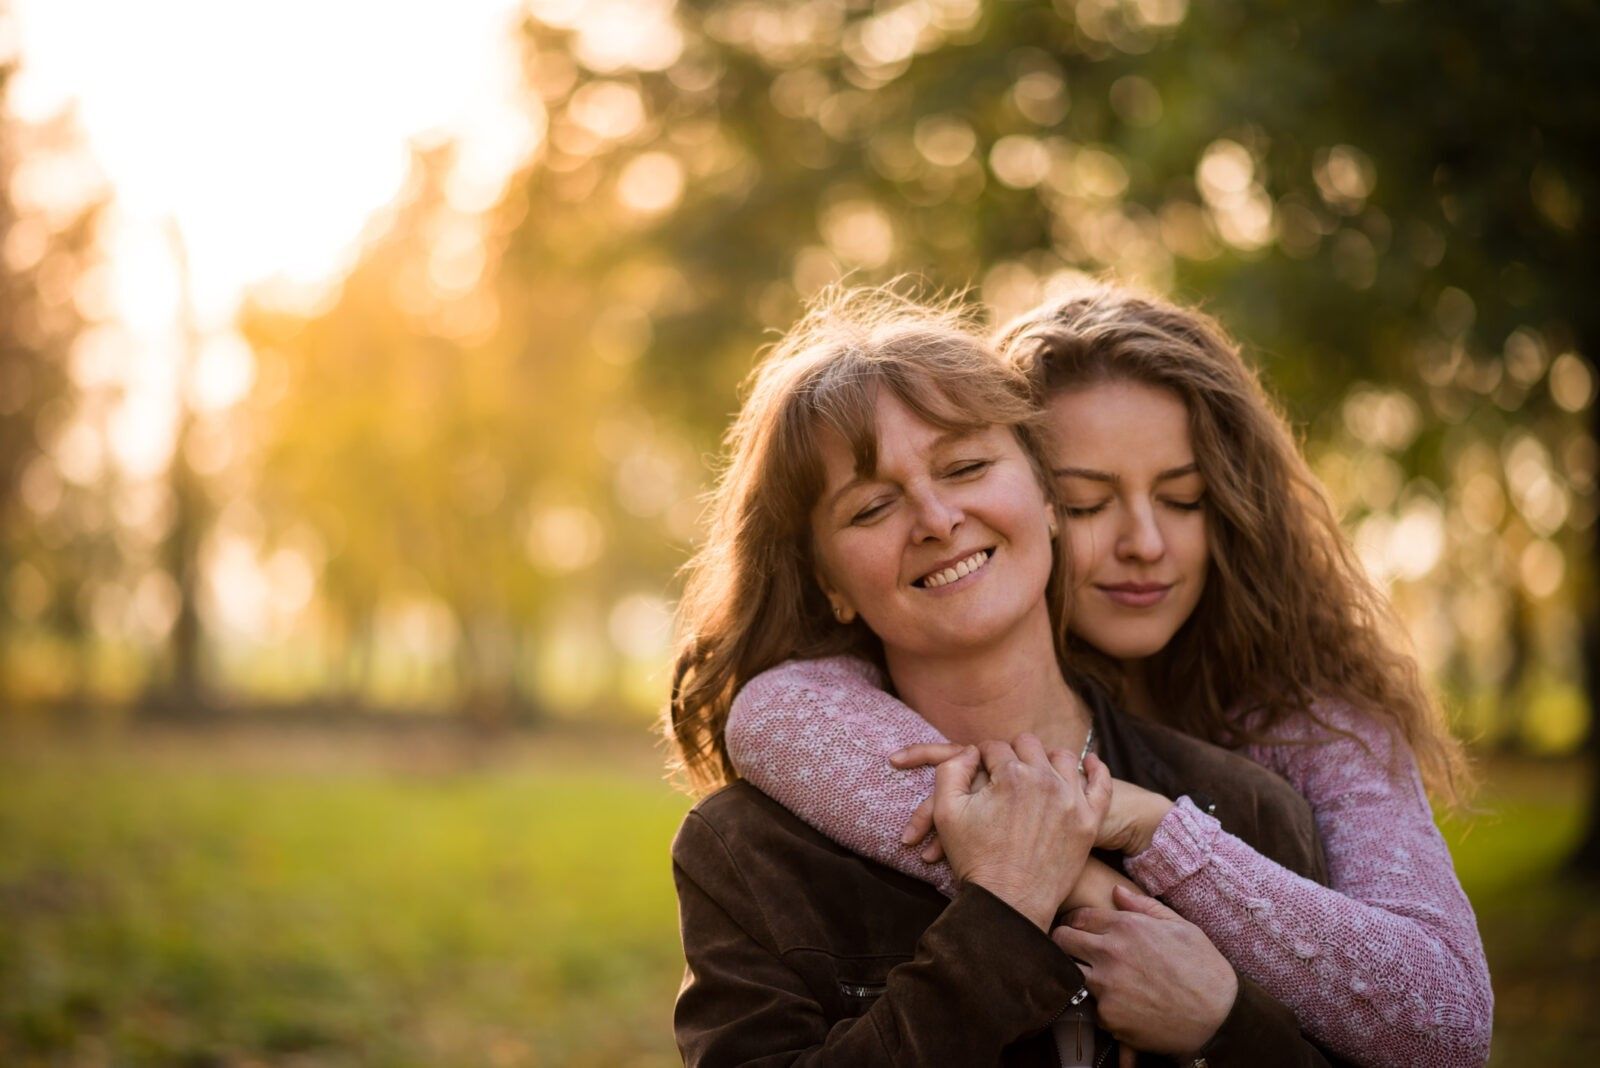 Teen woman embracing mother with closed eyes